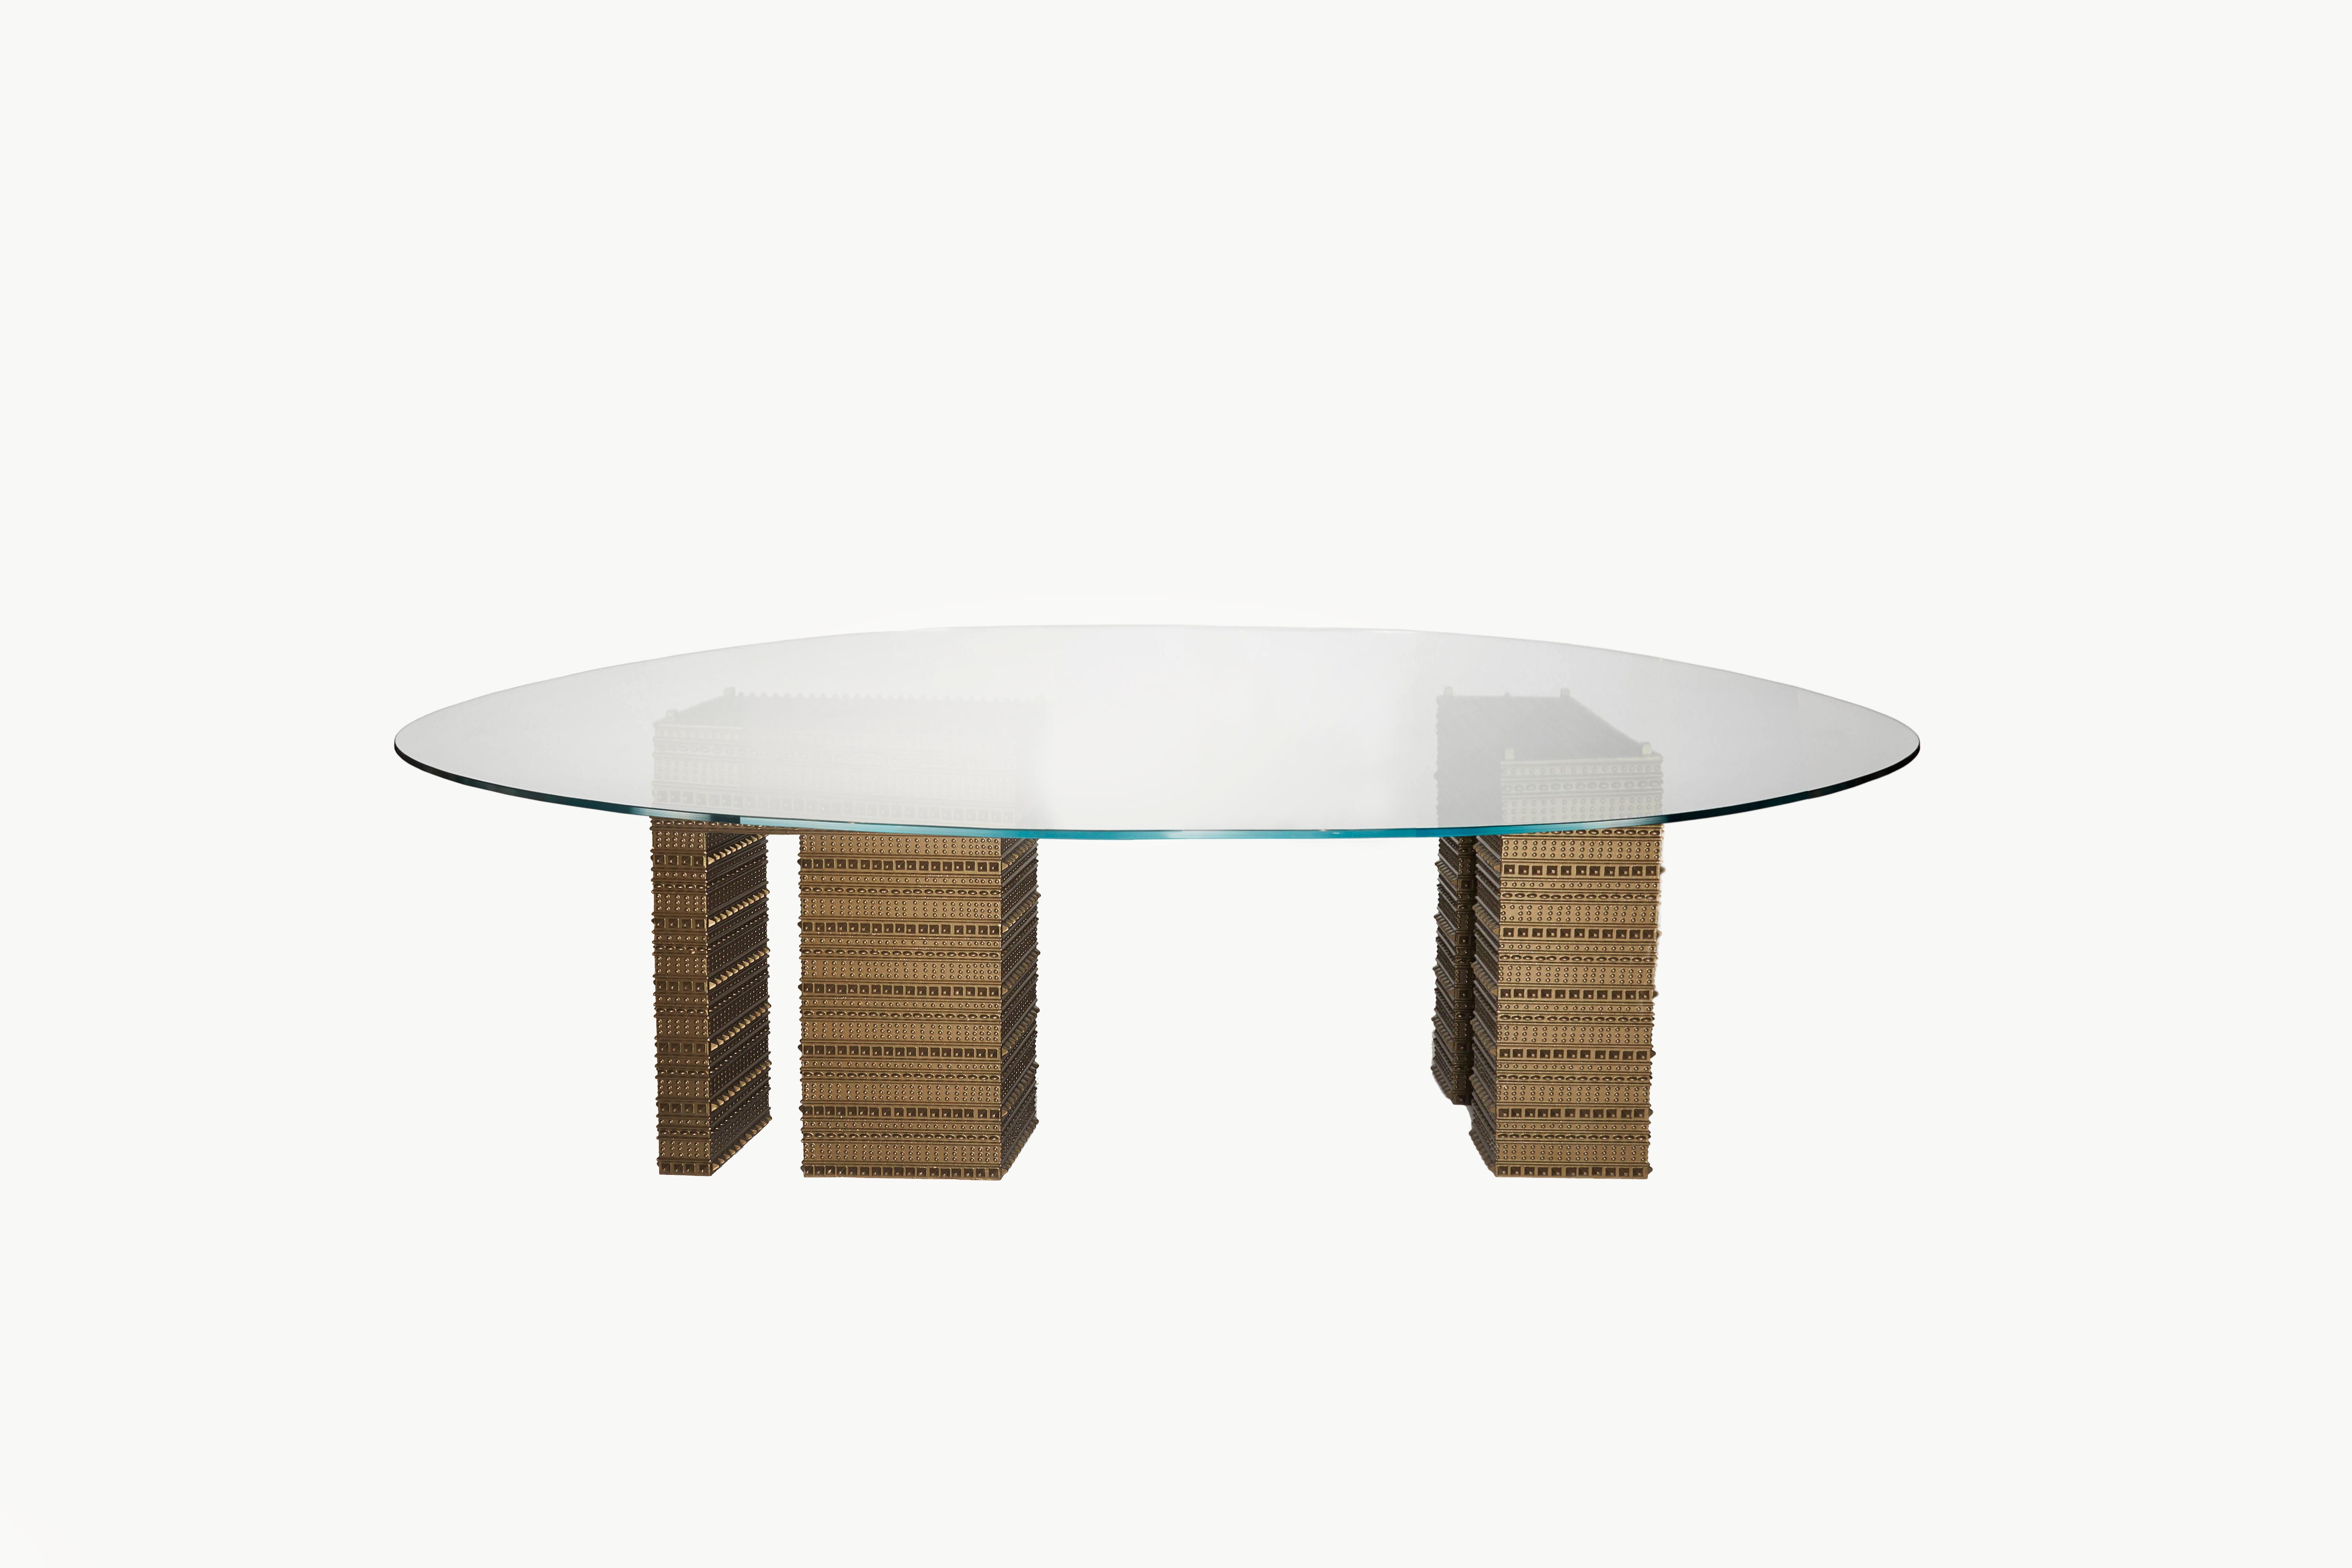 The strong geometrical Armour patterned bases support like cast bronze pillars the delicately placed squoval glass top on the Fortis Dining Table. A dining table created to encourage discussion and reflection through what is revealed below the glass